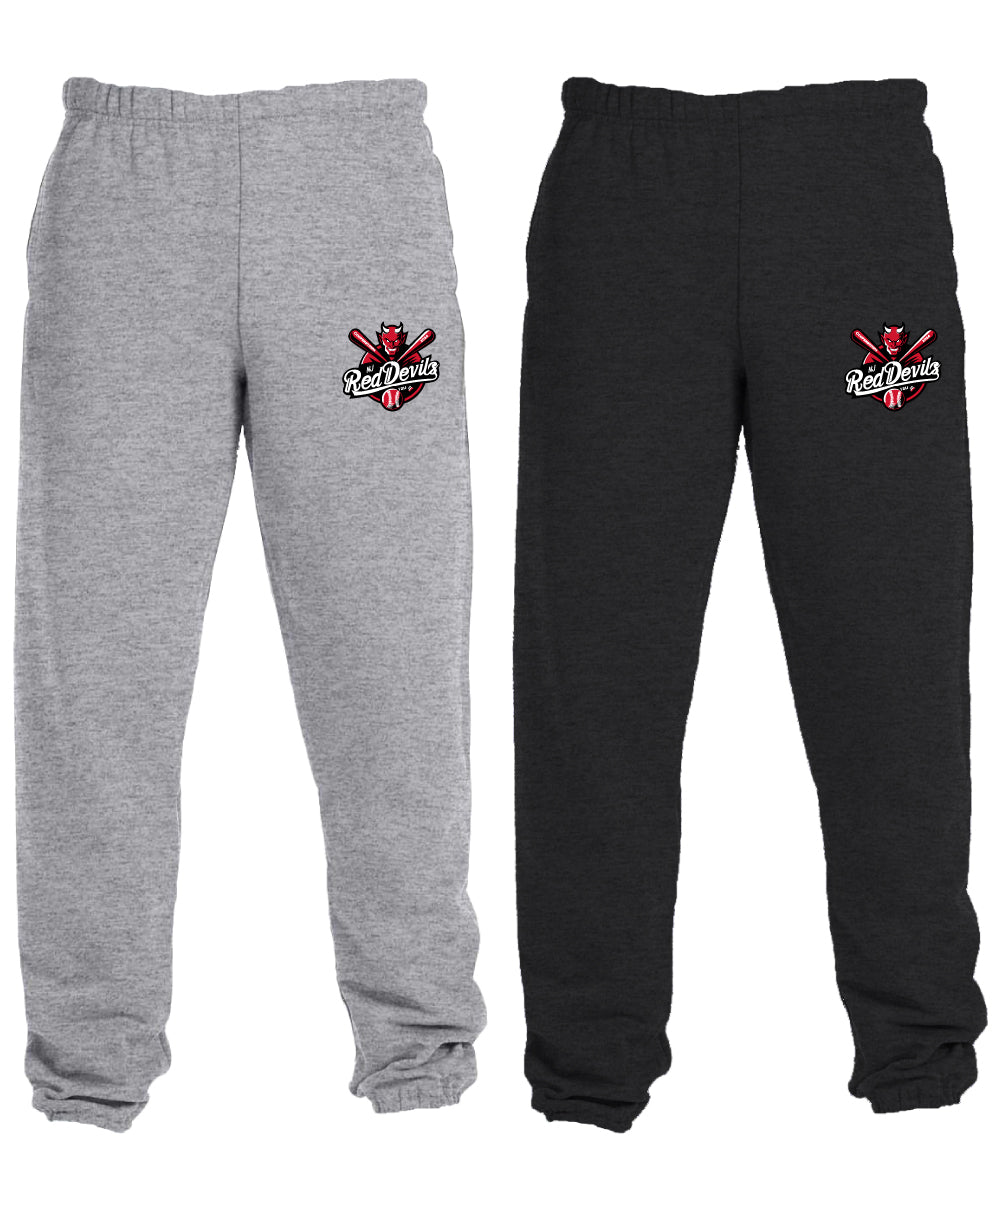 Cooperstown Baseball - Closed-Bottom Sweatpants